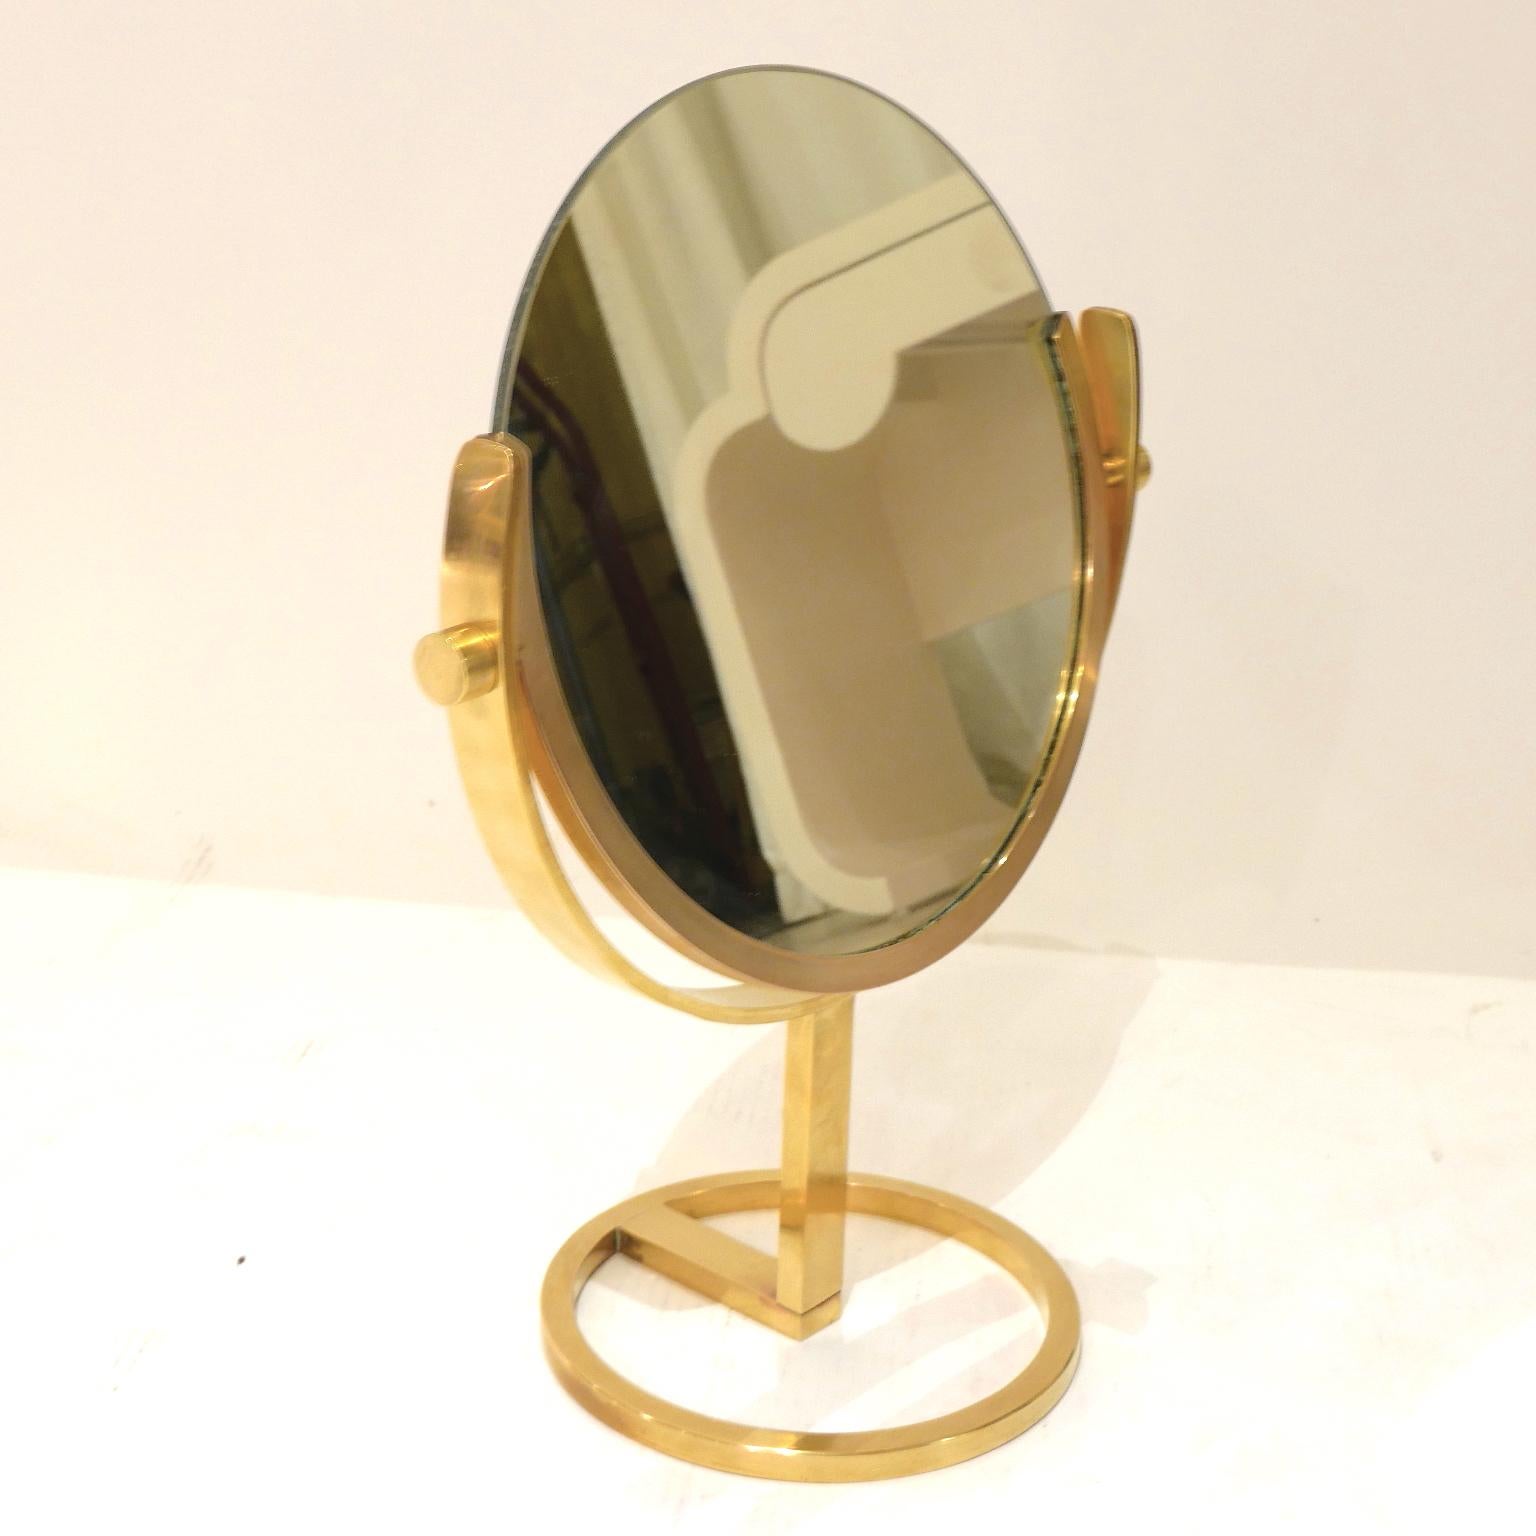 A heavy high quality brass vanity or table mirror with beautiful patina and sleek proportions that would look great on any dresser or vanity. 